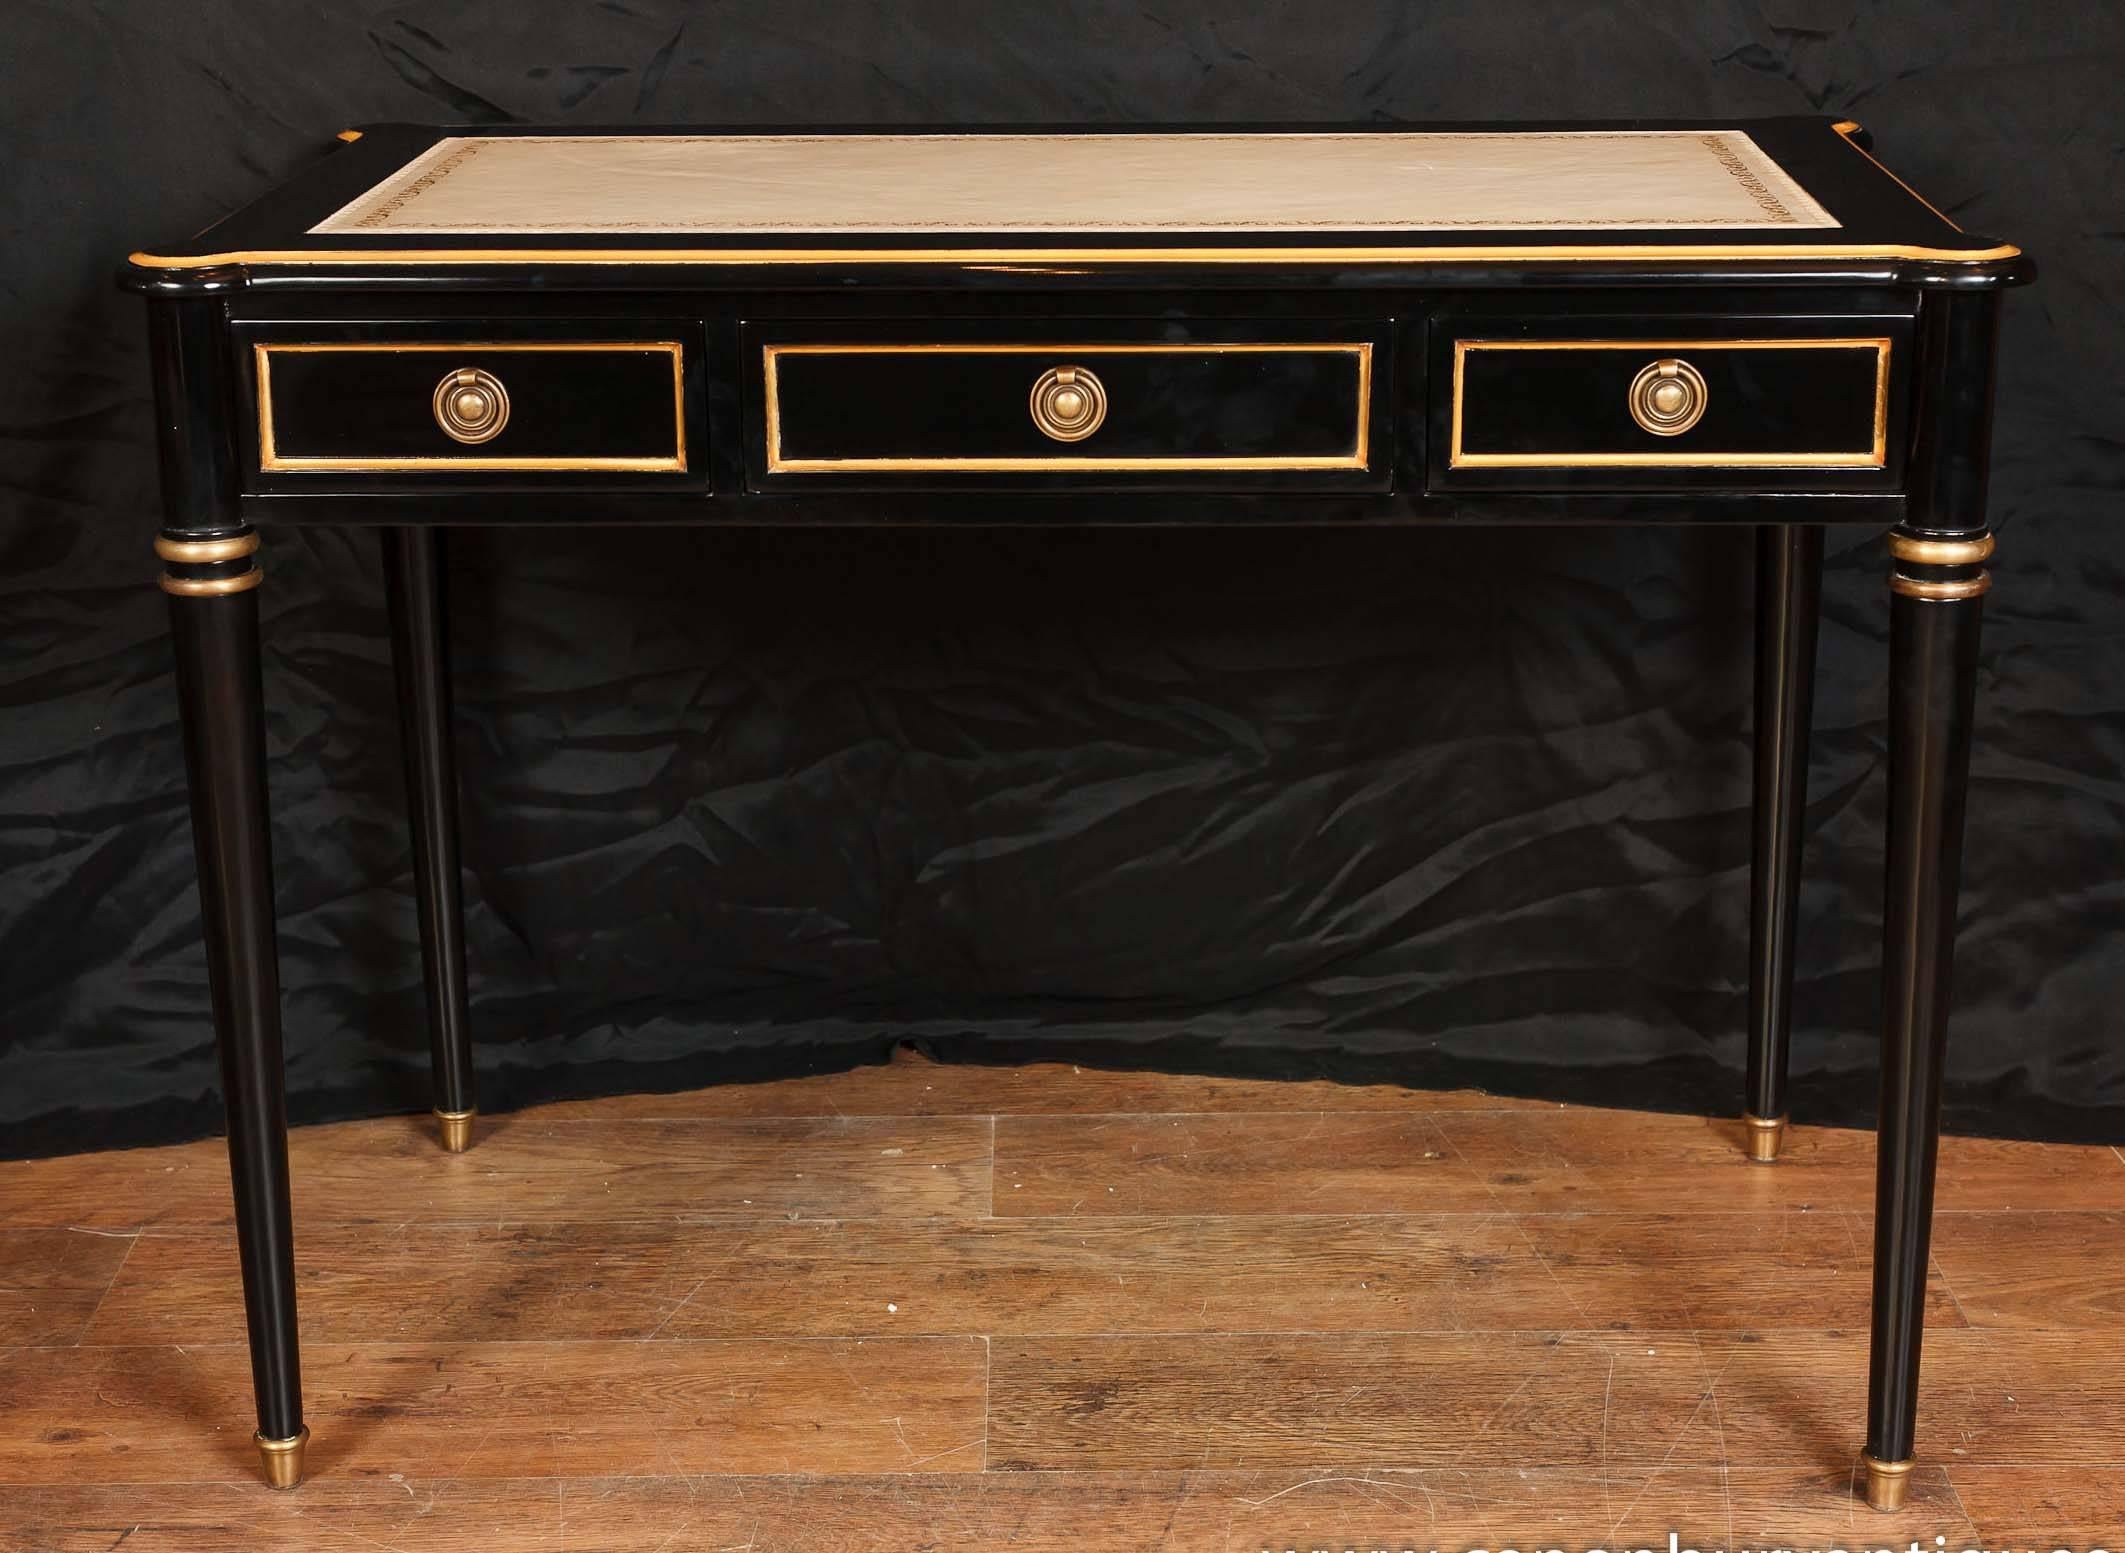 Regency Lacquer Desk Writing Table Bureau Plat In Excellent Condition For Sale In Potters Bar, Herts